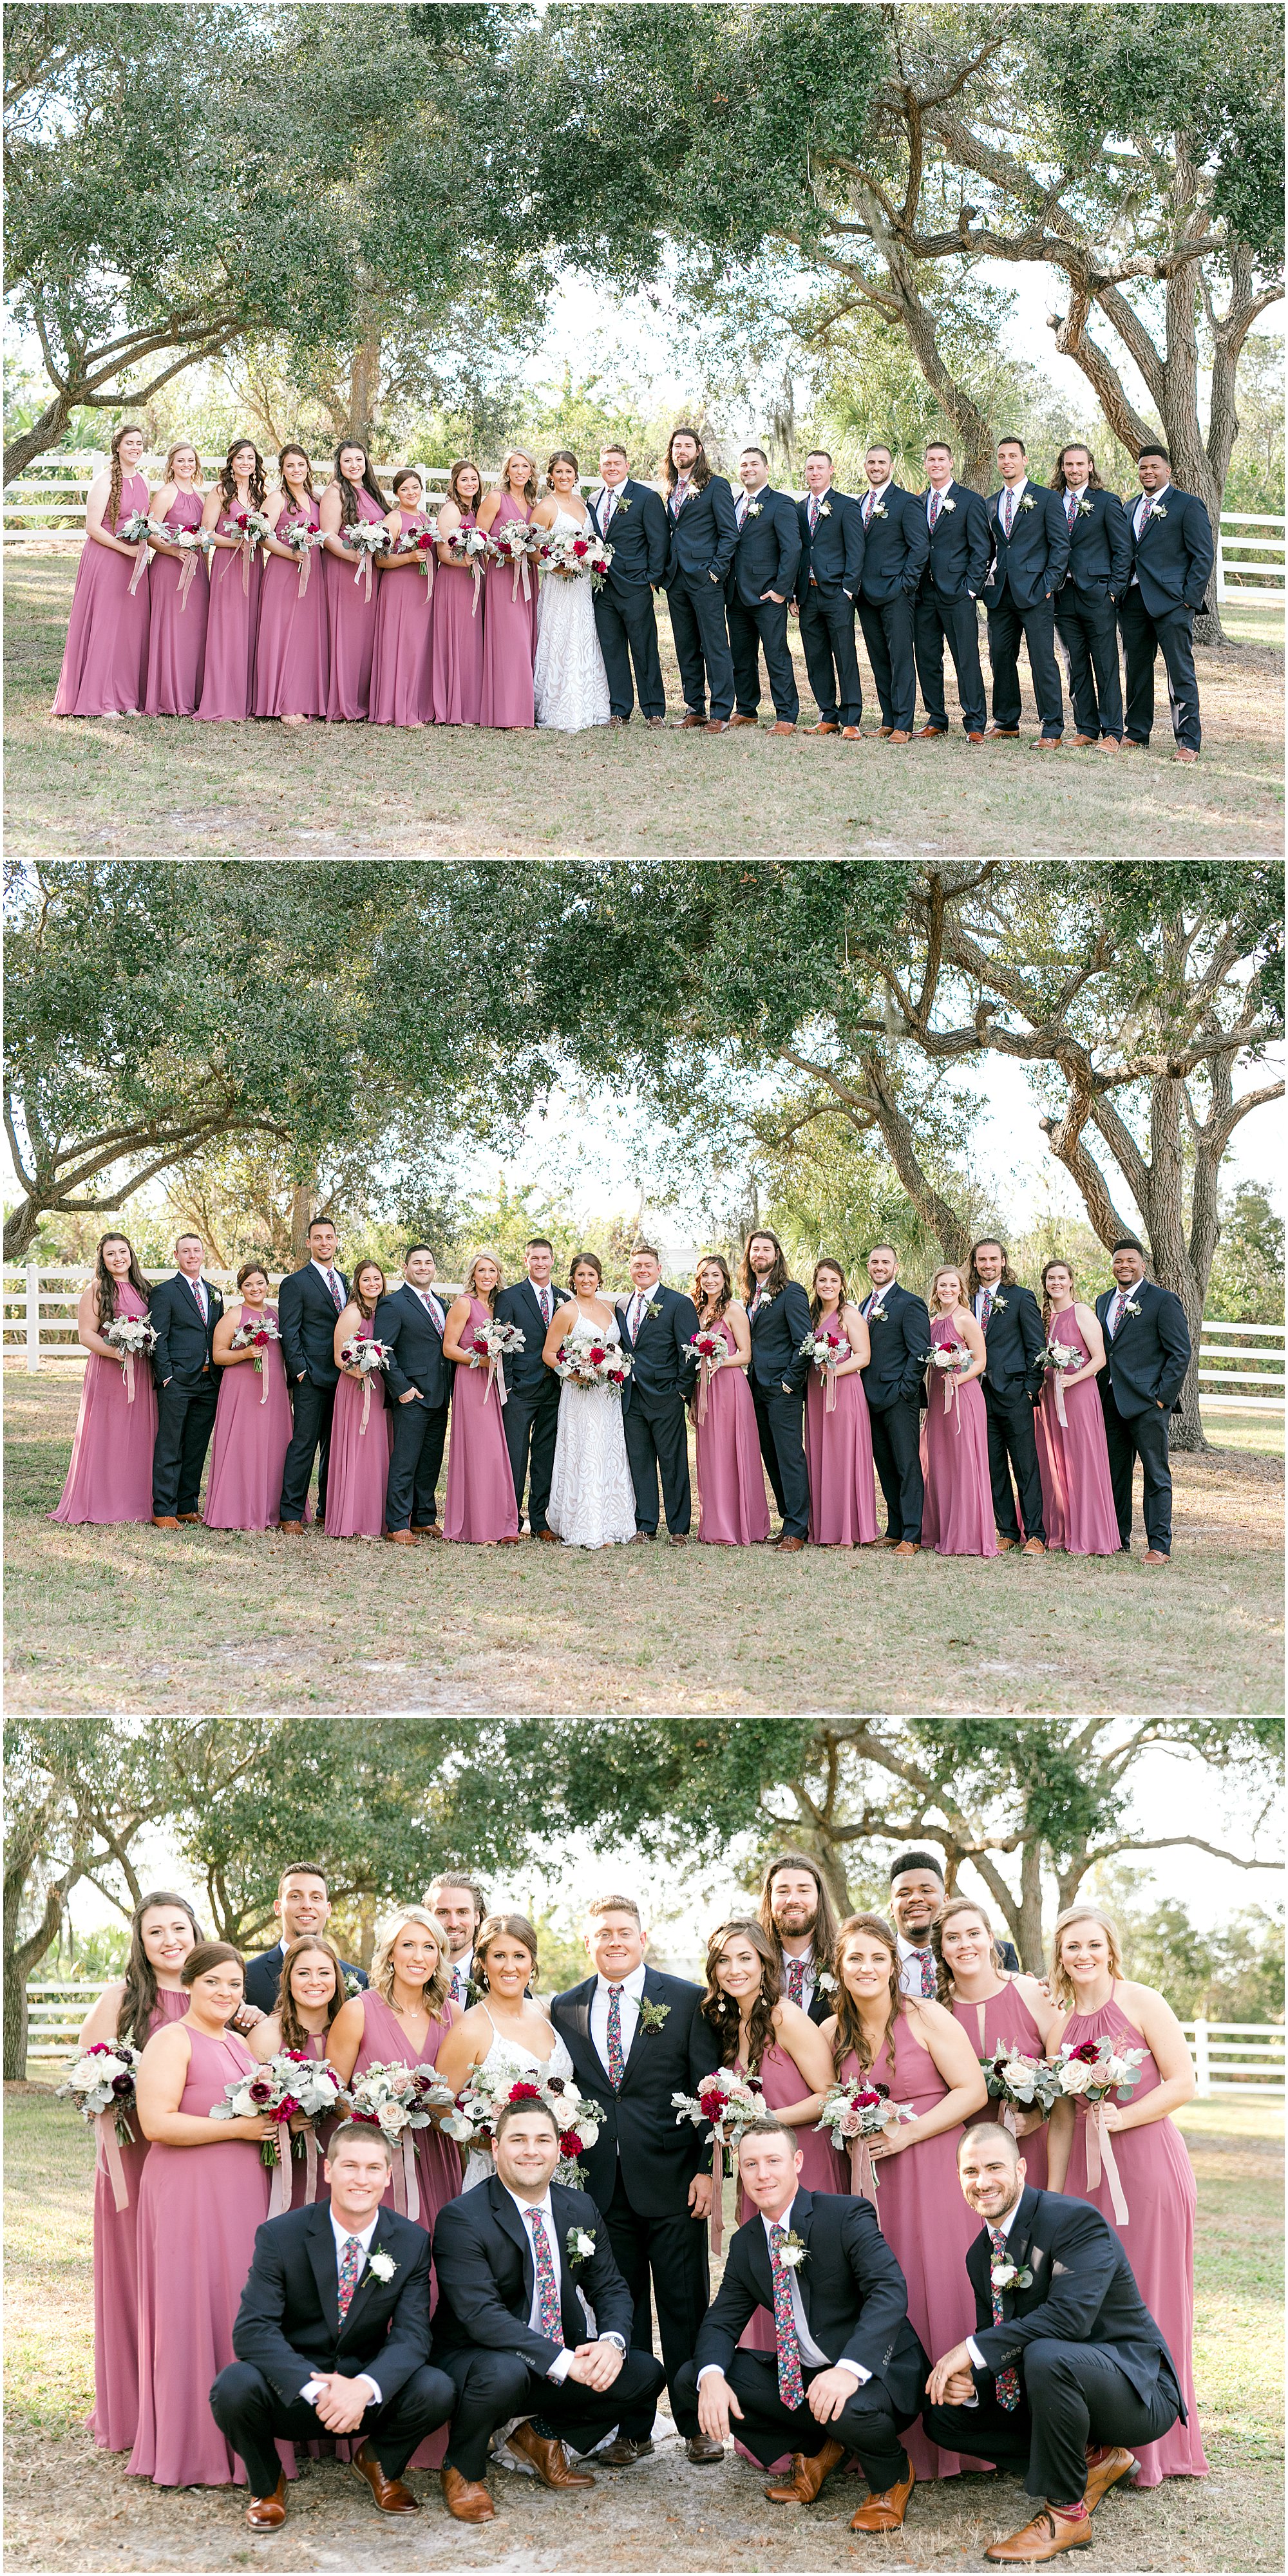 Wedding party gathered together on the lawn for portraits with bridesmaids in dusty rose color dresses